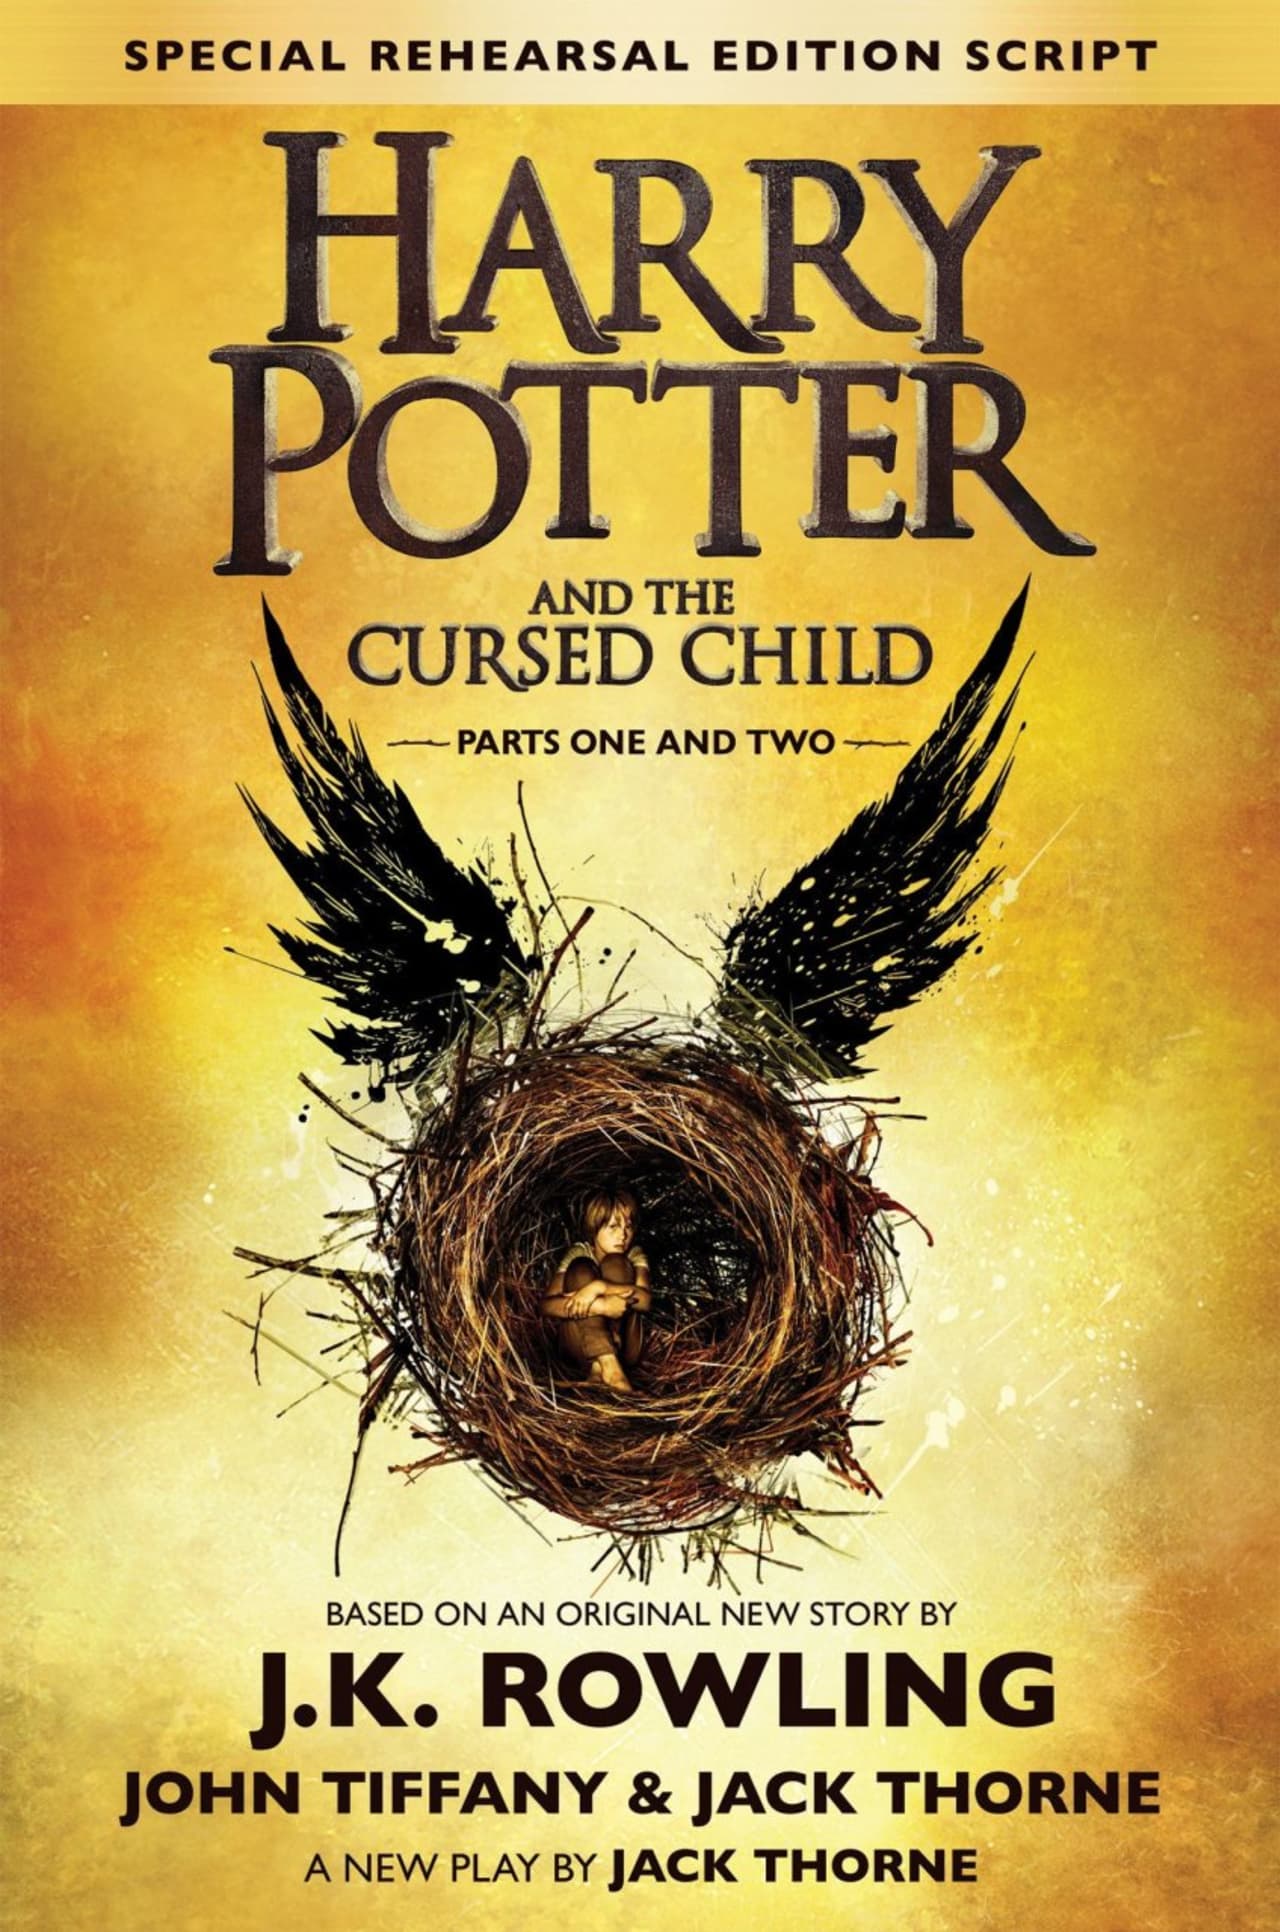 The book "Harry Potter and the Cursed Child" is a special-edition script of the play by the same name, which will open on July 30, a day before the book is released.